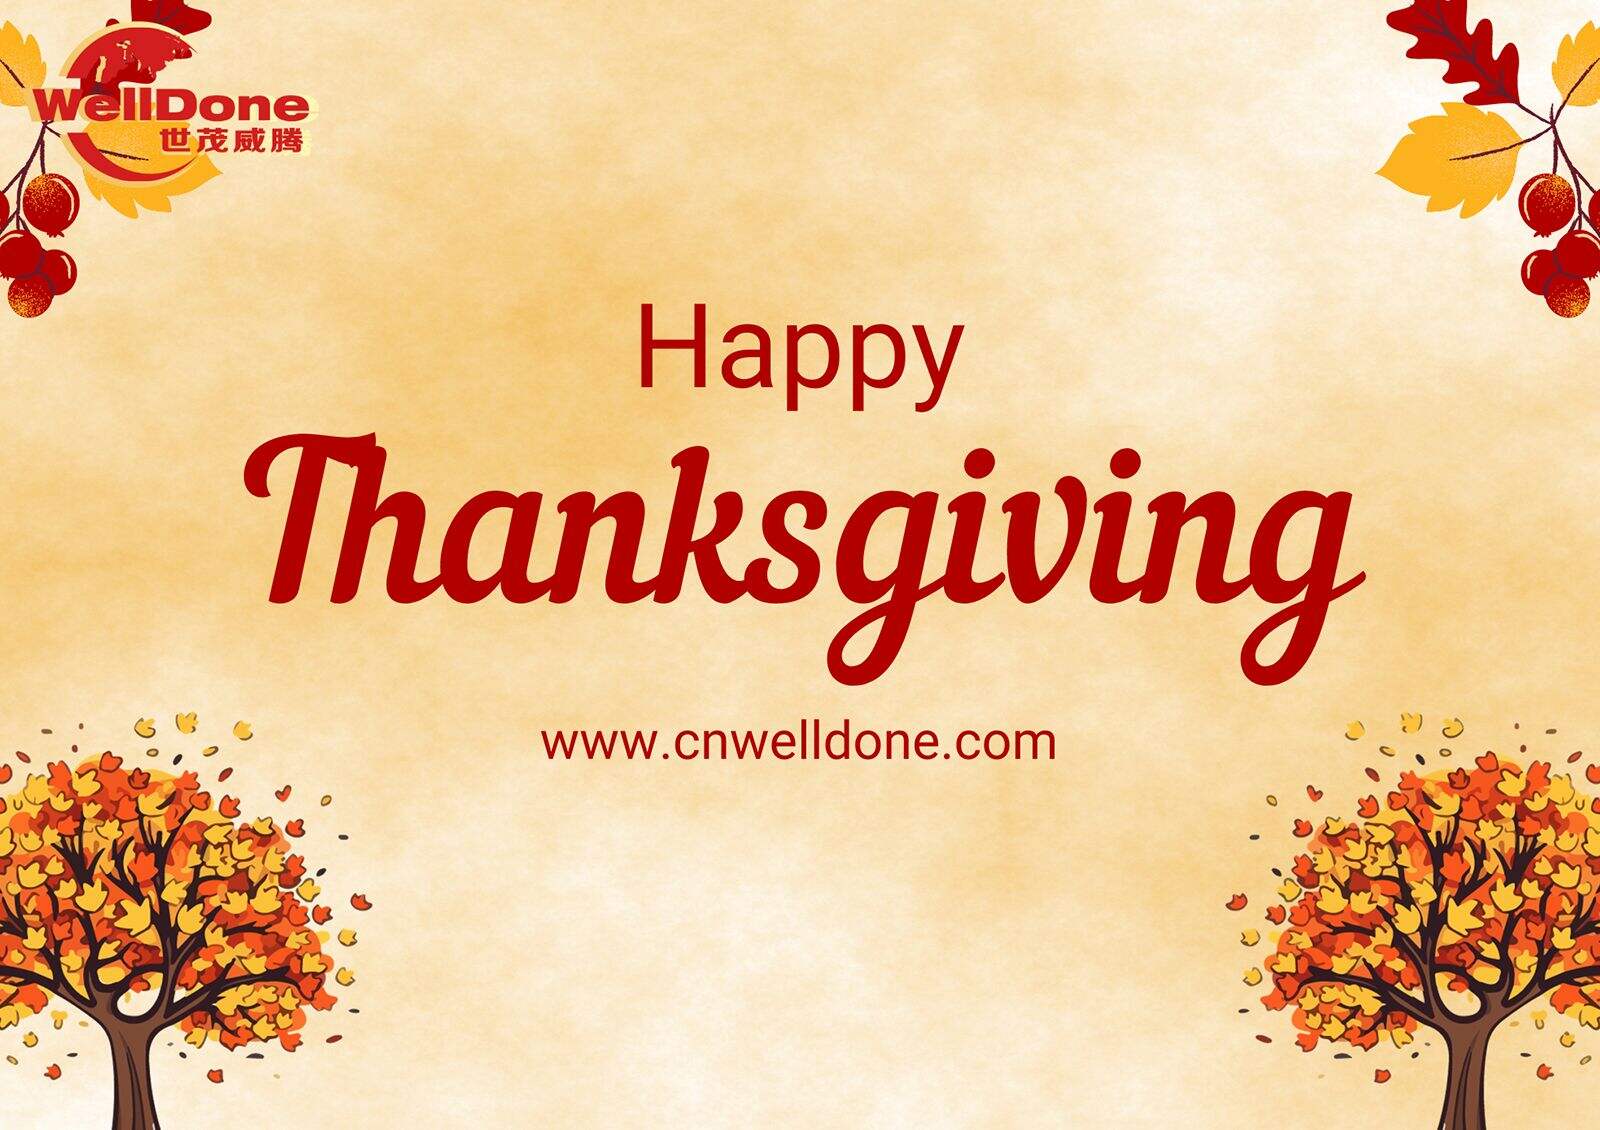 WELLDONE Wishes You A Happy Thanksgiving Day | WELLDONE Family